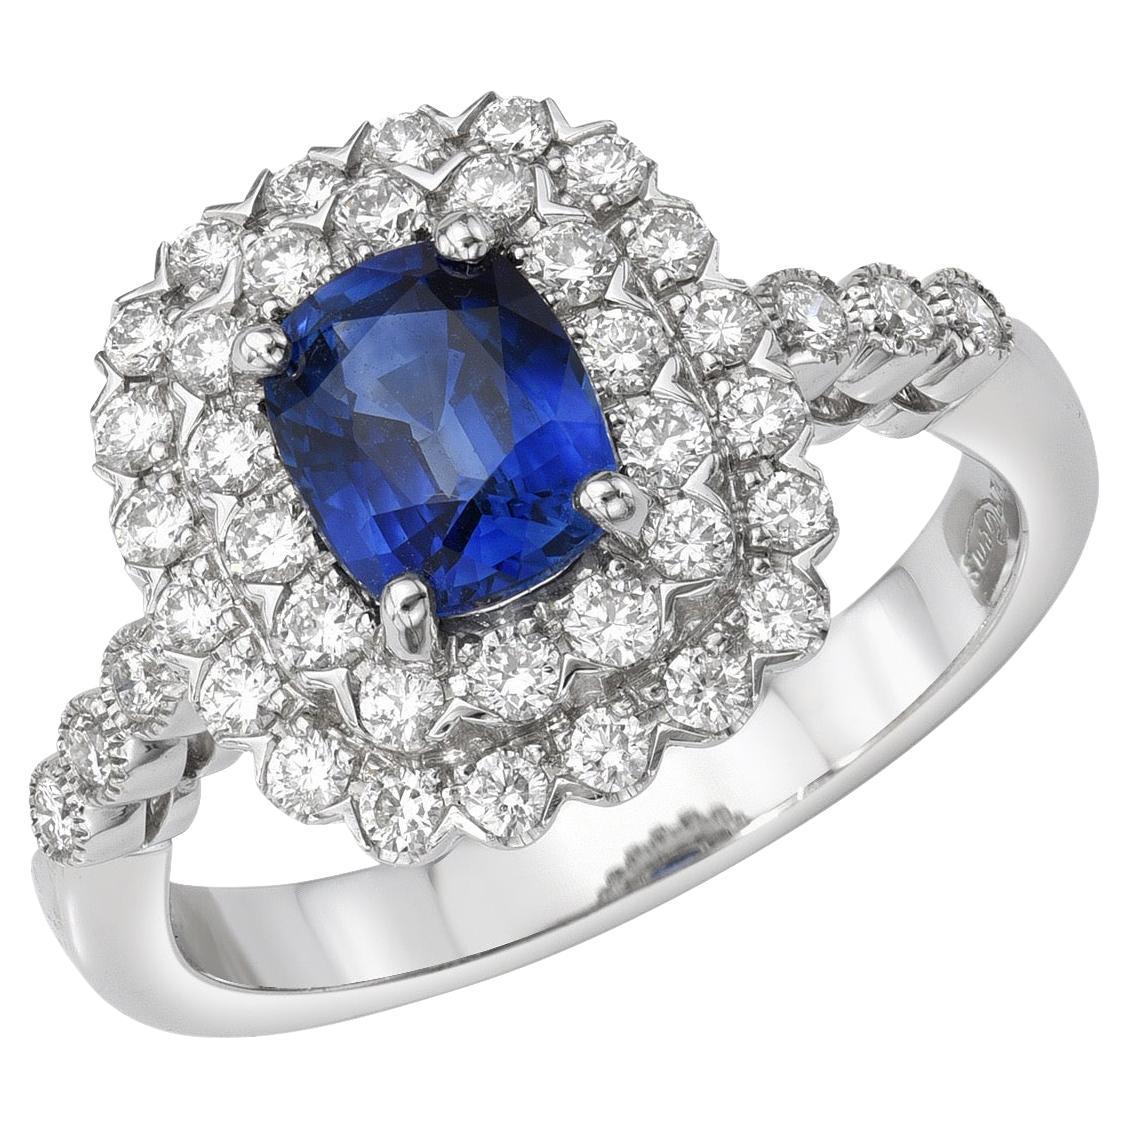 Blue Sapphire Ring 1.34 Carat Cushion For Sale